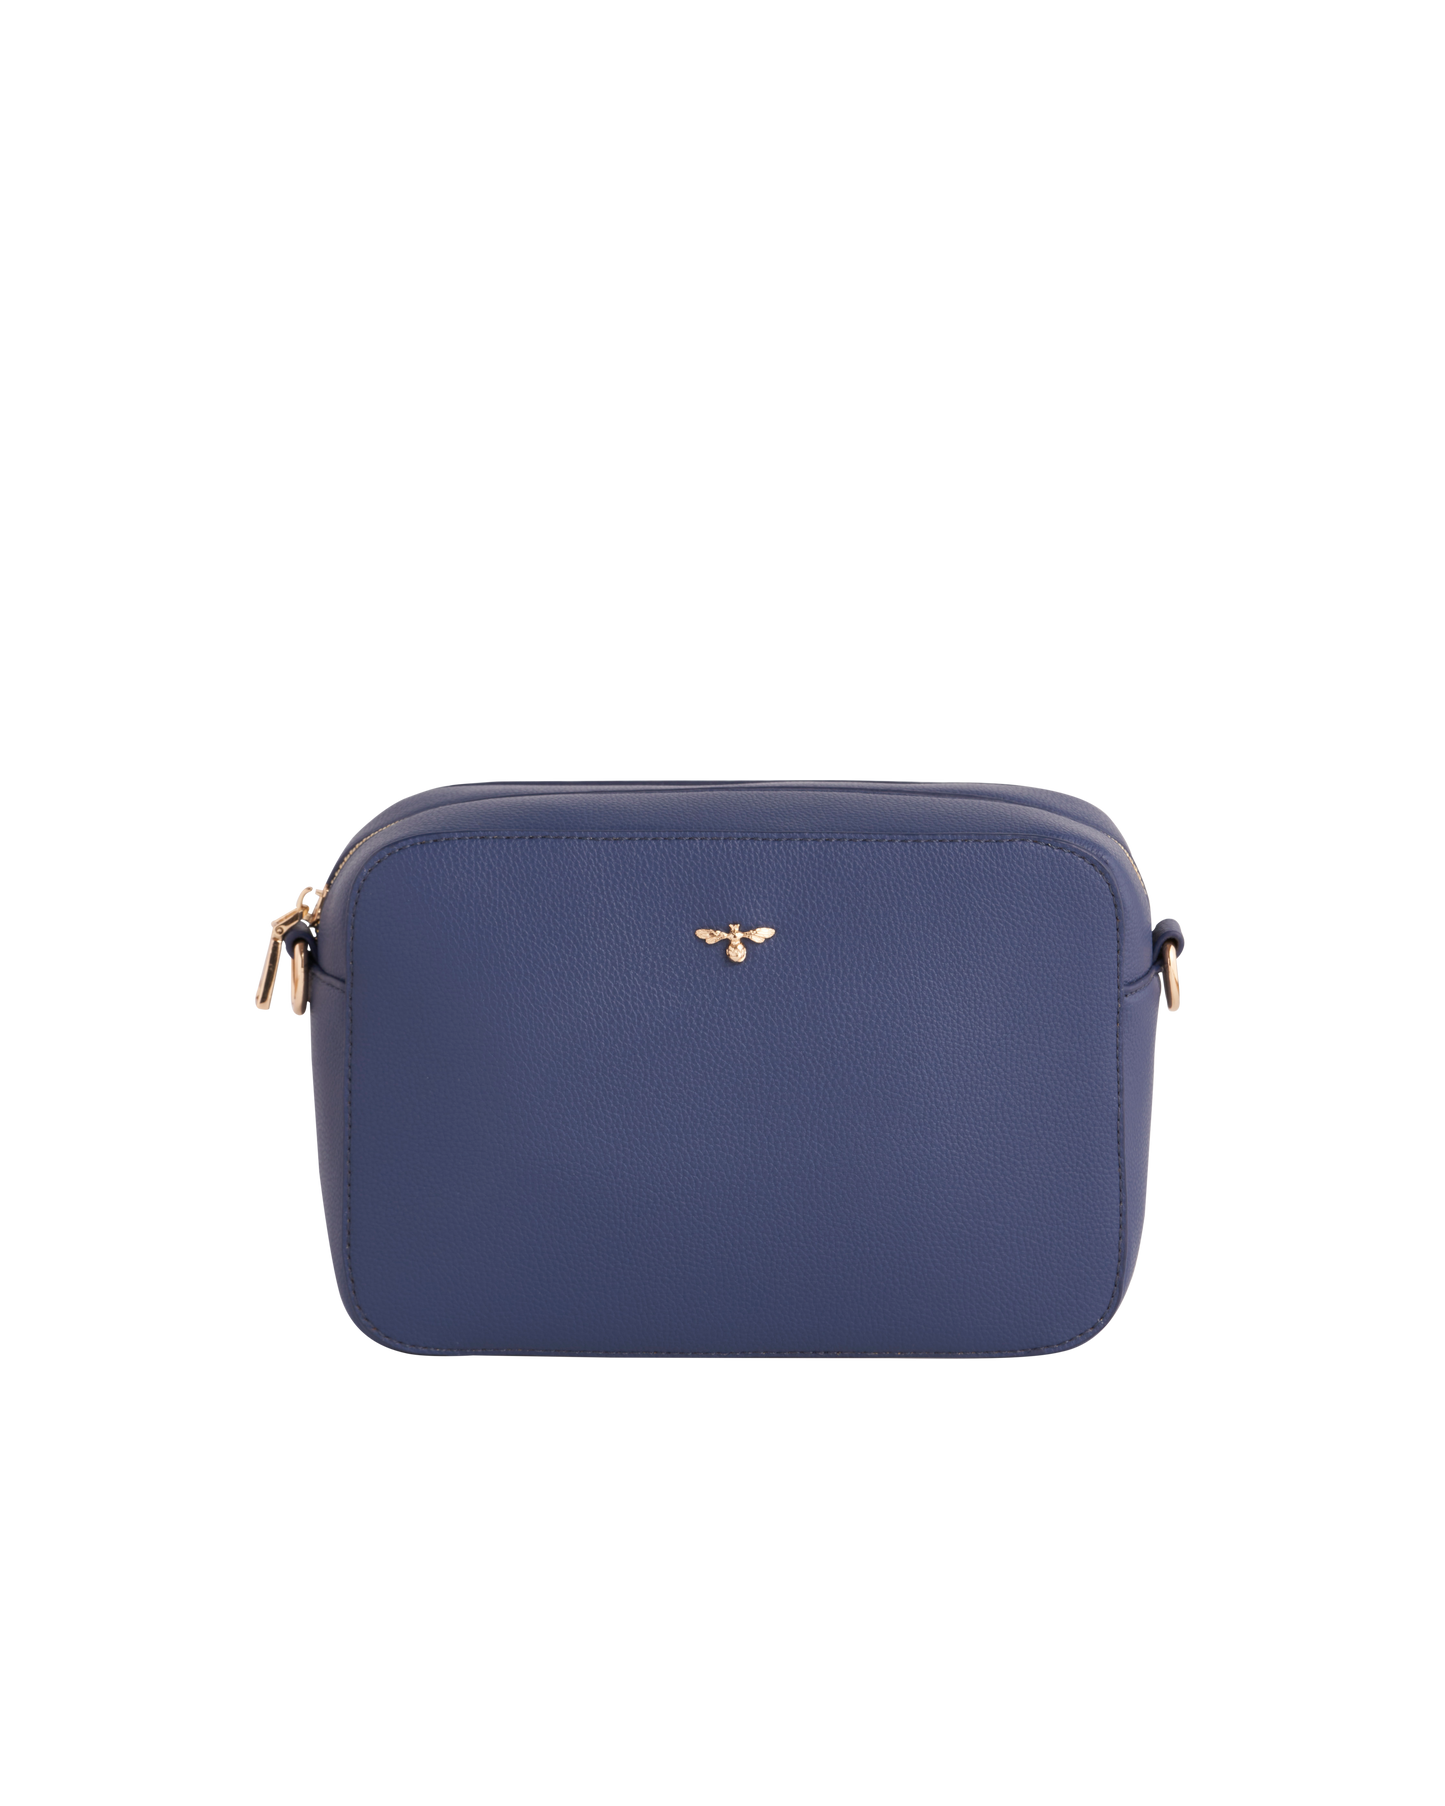 FABLE Catherine Rowe Pet Portraits Navy Blue Camera Bag